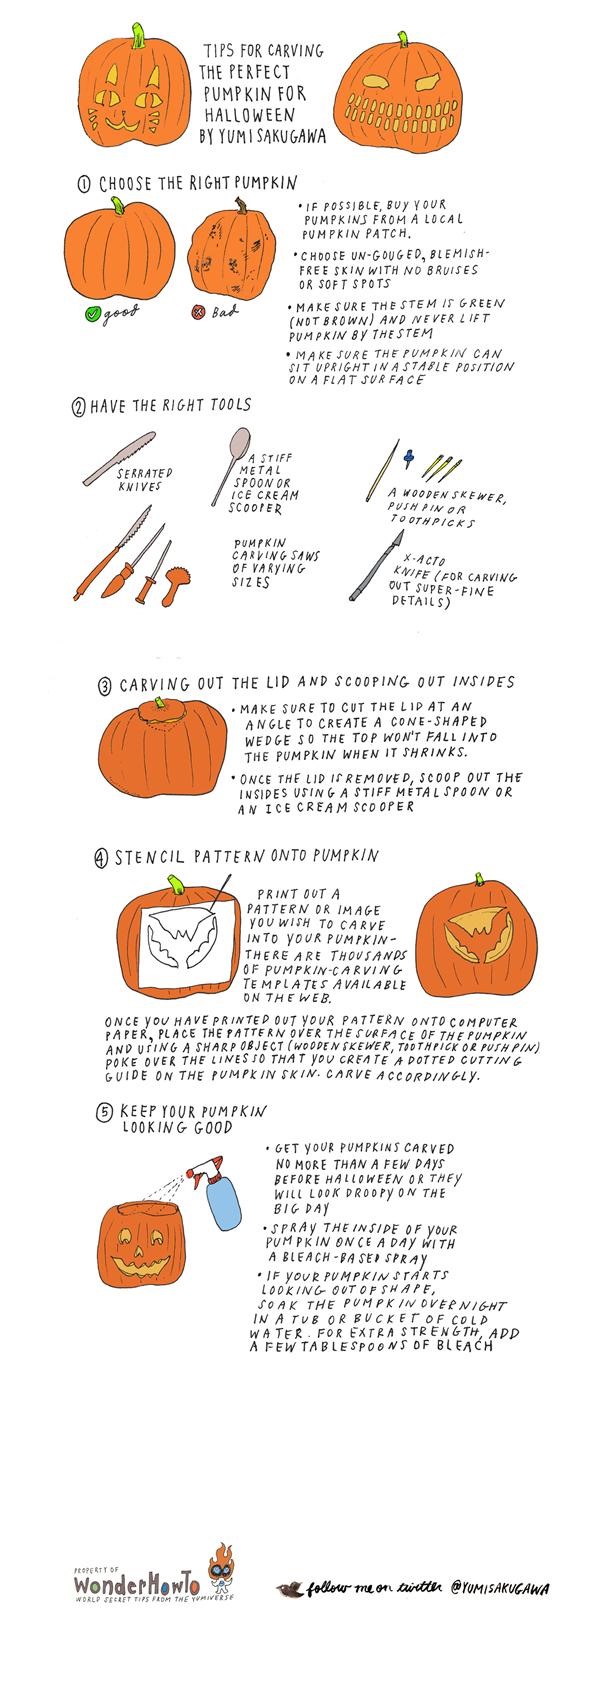 How to Carve the Perfect Halloween Pumpkin